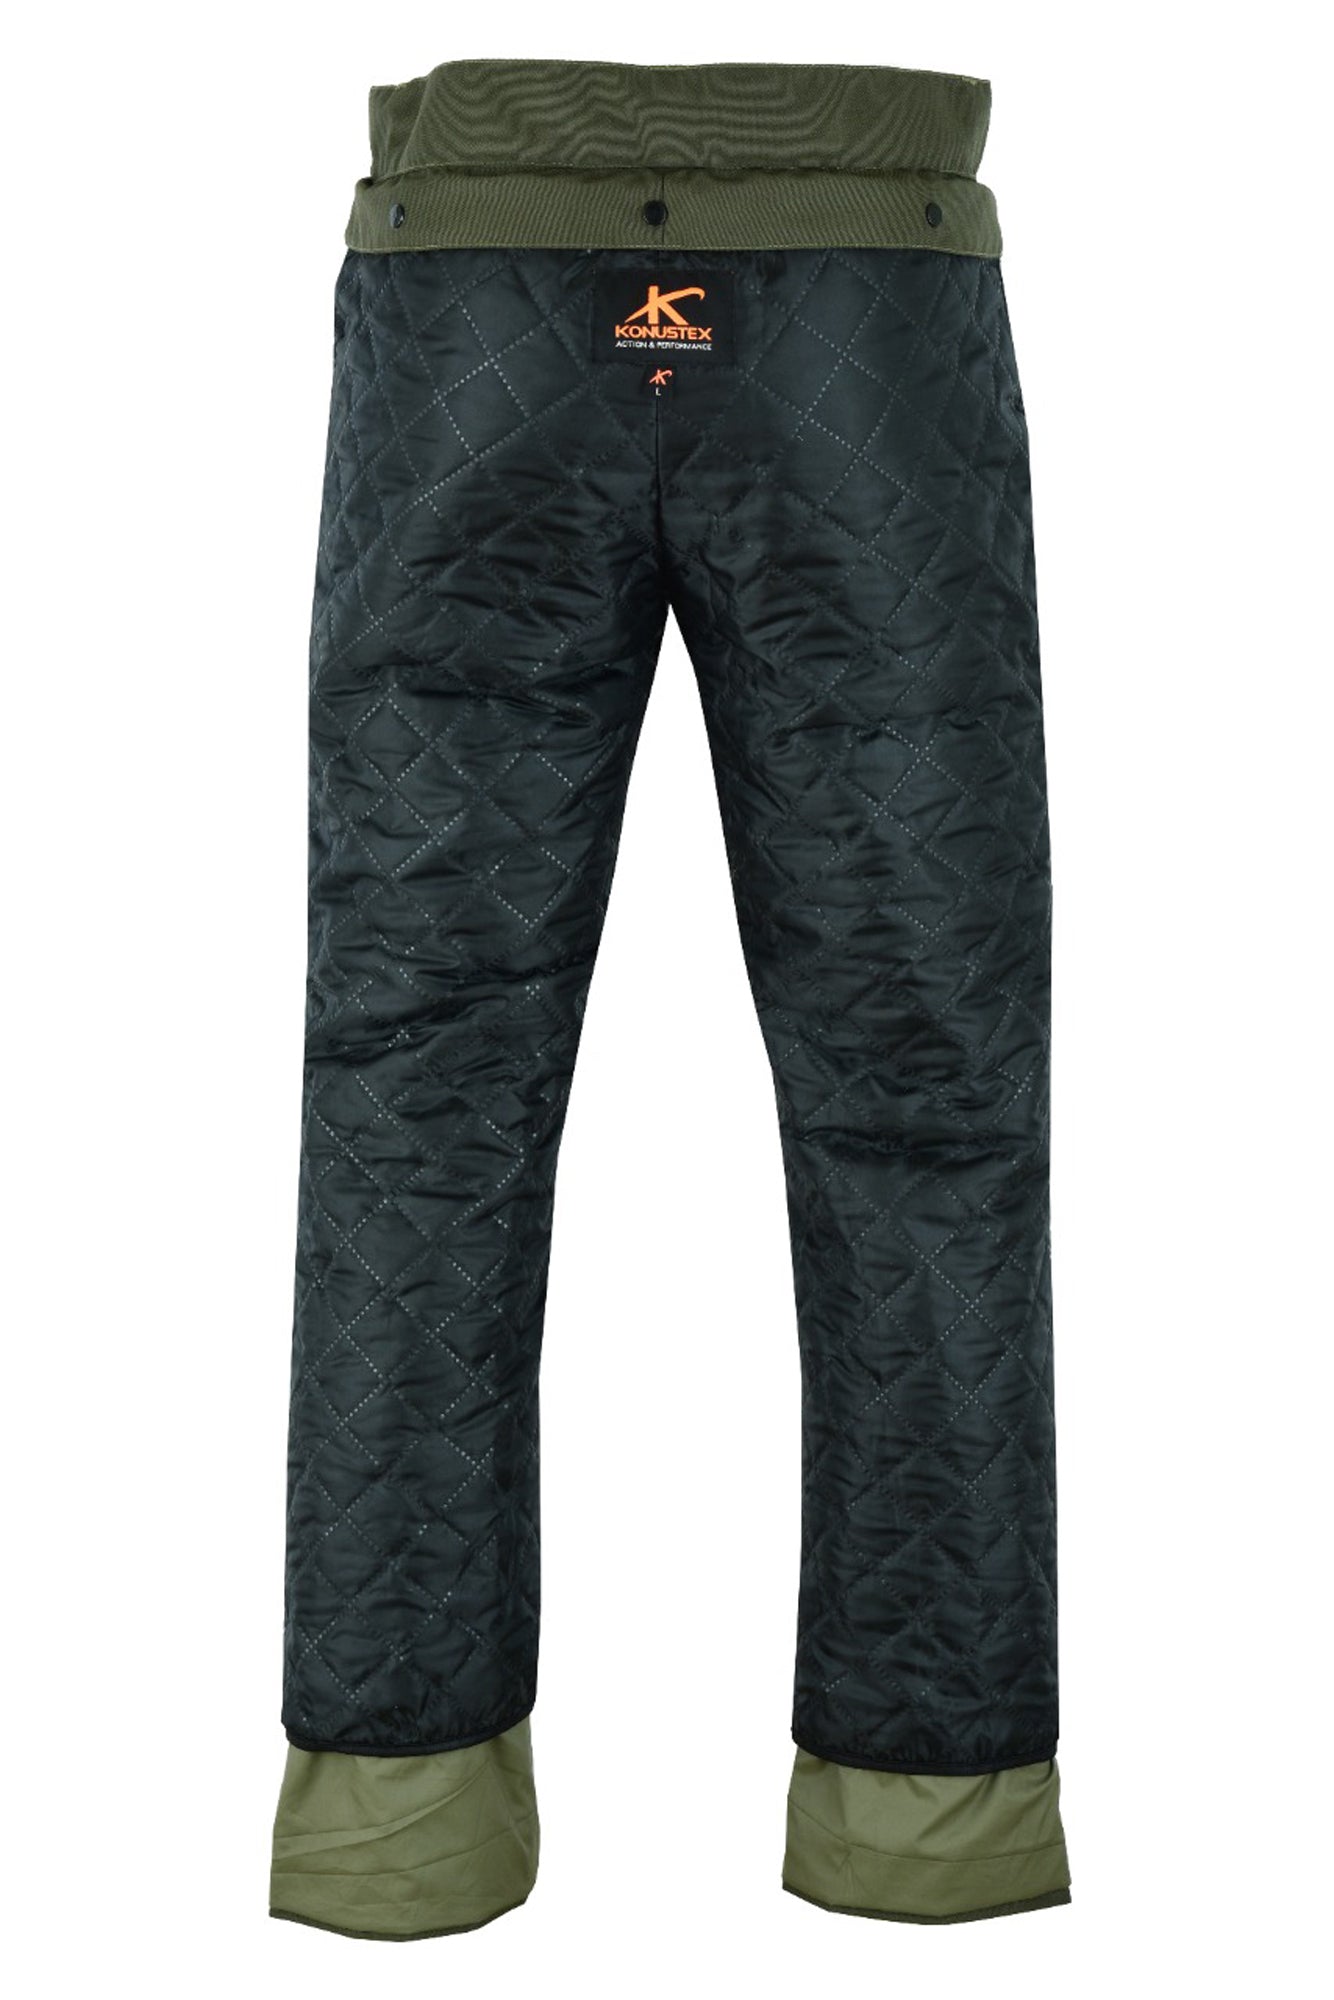 Deerhunter Youth Chasse Trouser